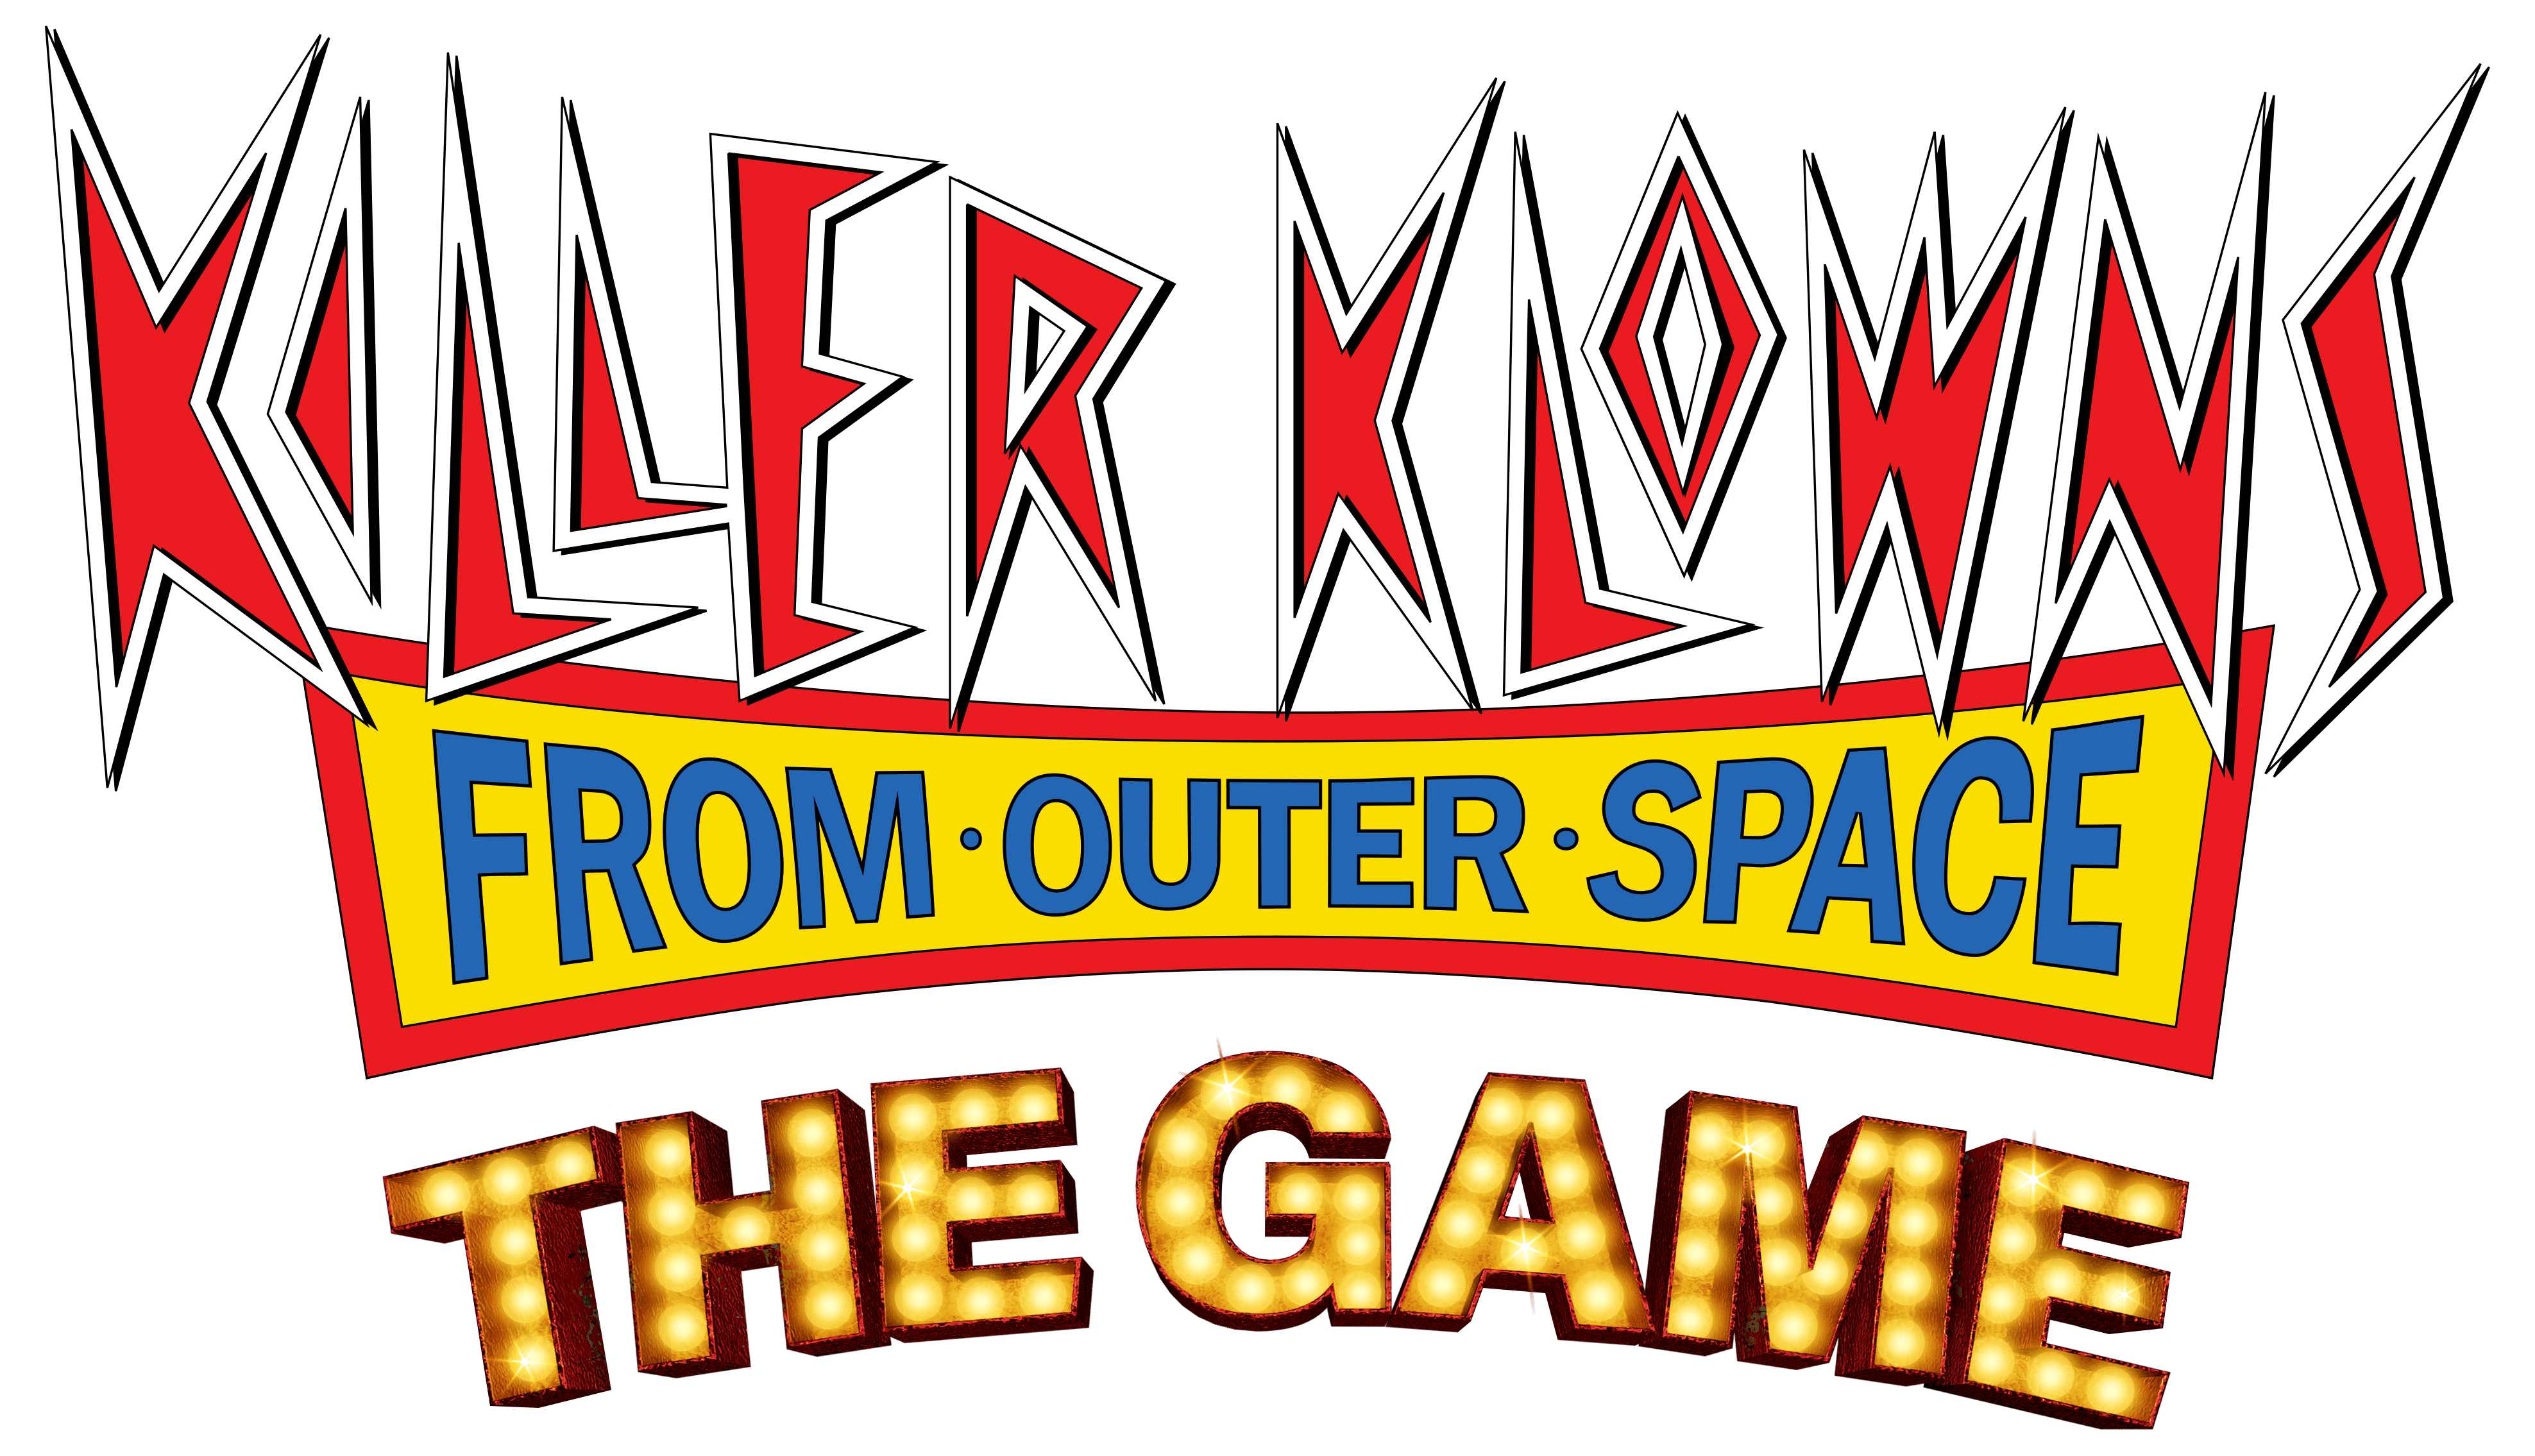 Killer from outer space. Killer Klowns from Outer Space the game. Killer Klowns from Outer Space. Killer Klowns from Outer игра. Killer Klowns from Outer Space Comics.